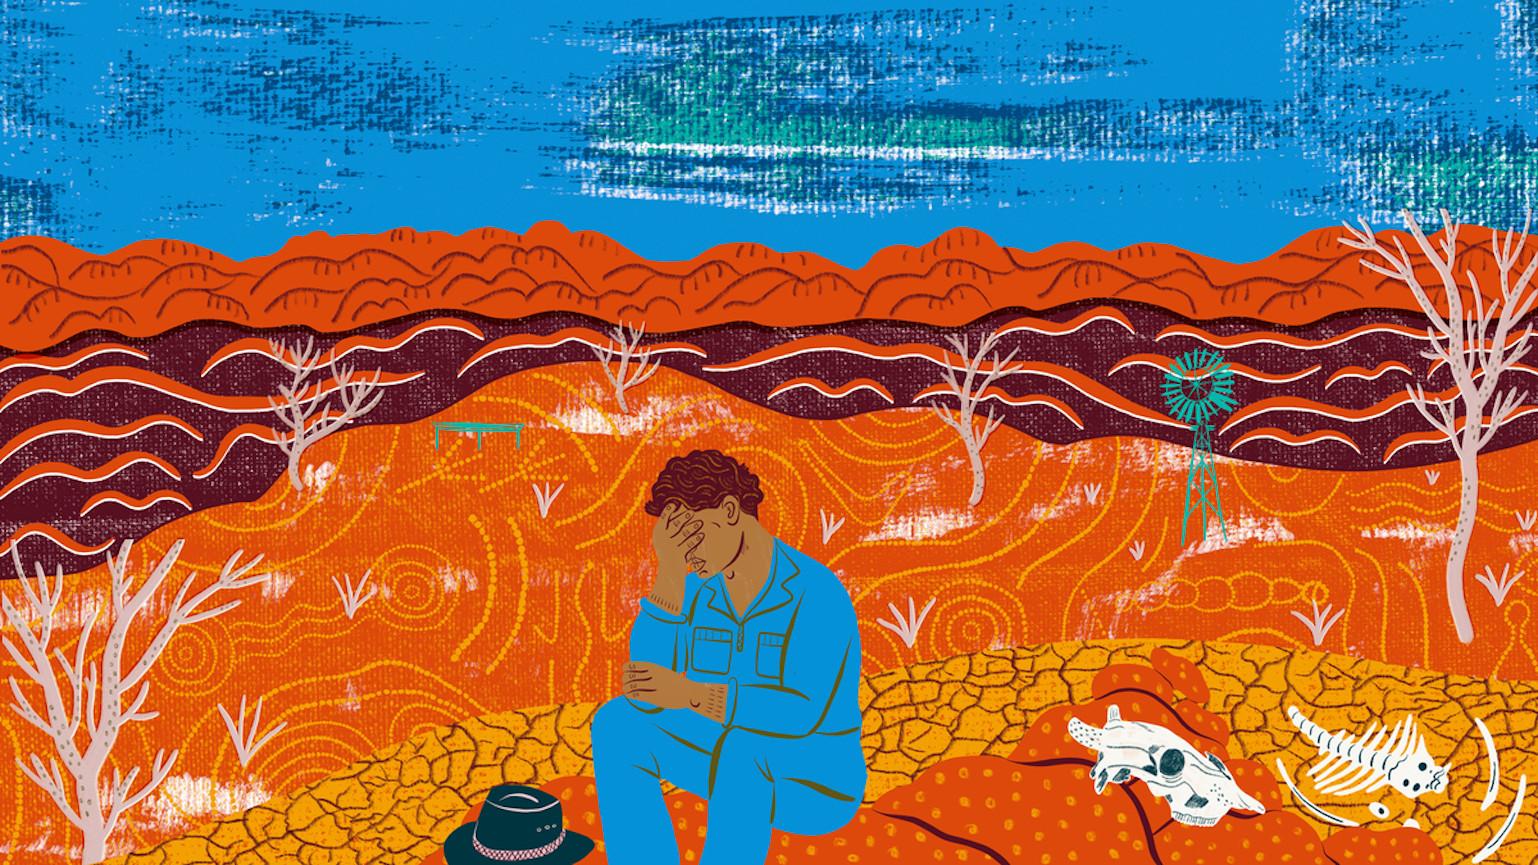 Illustration of a person sitting in a desert environment, their hand is covering their face.